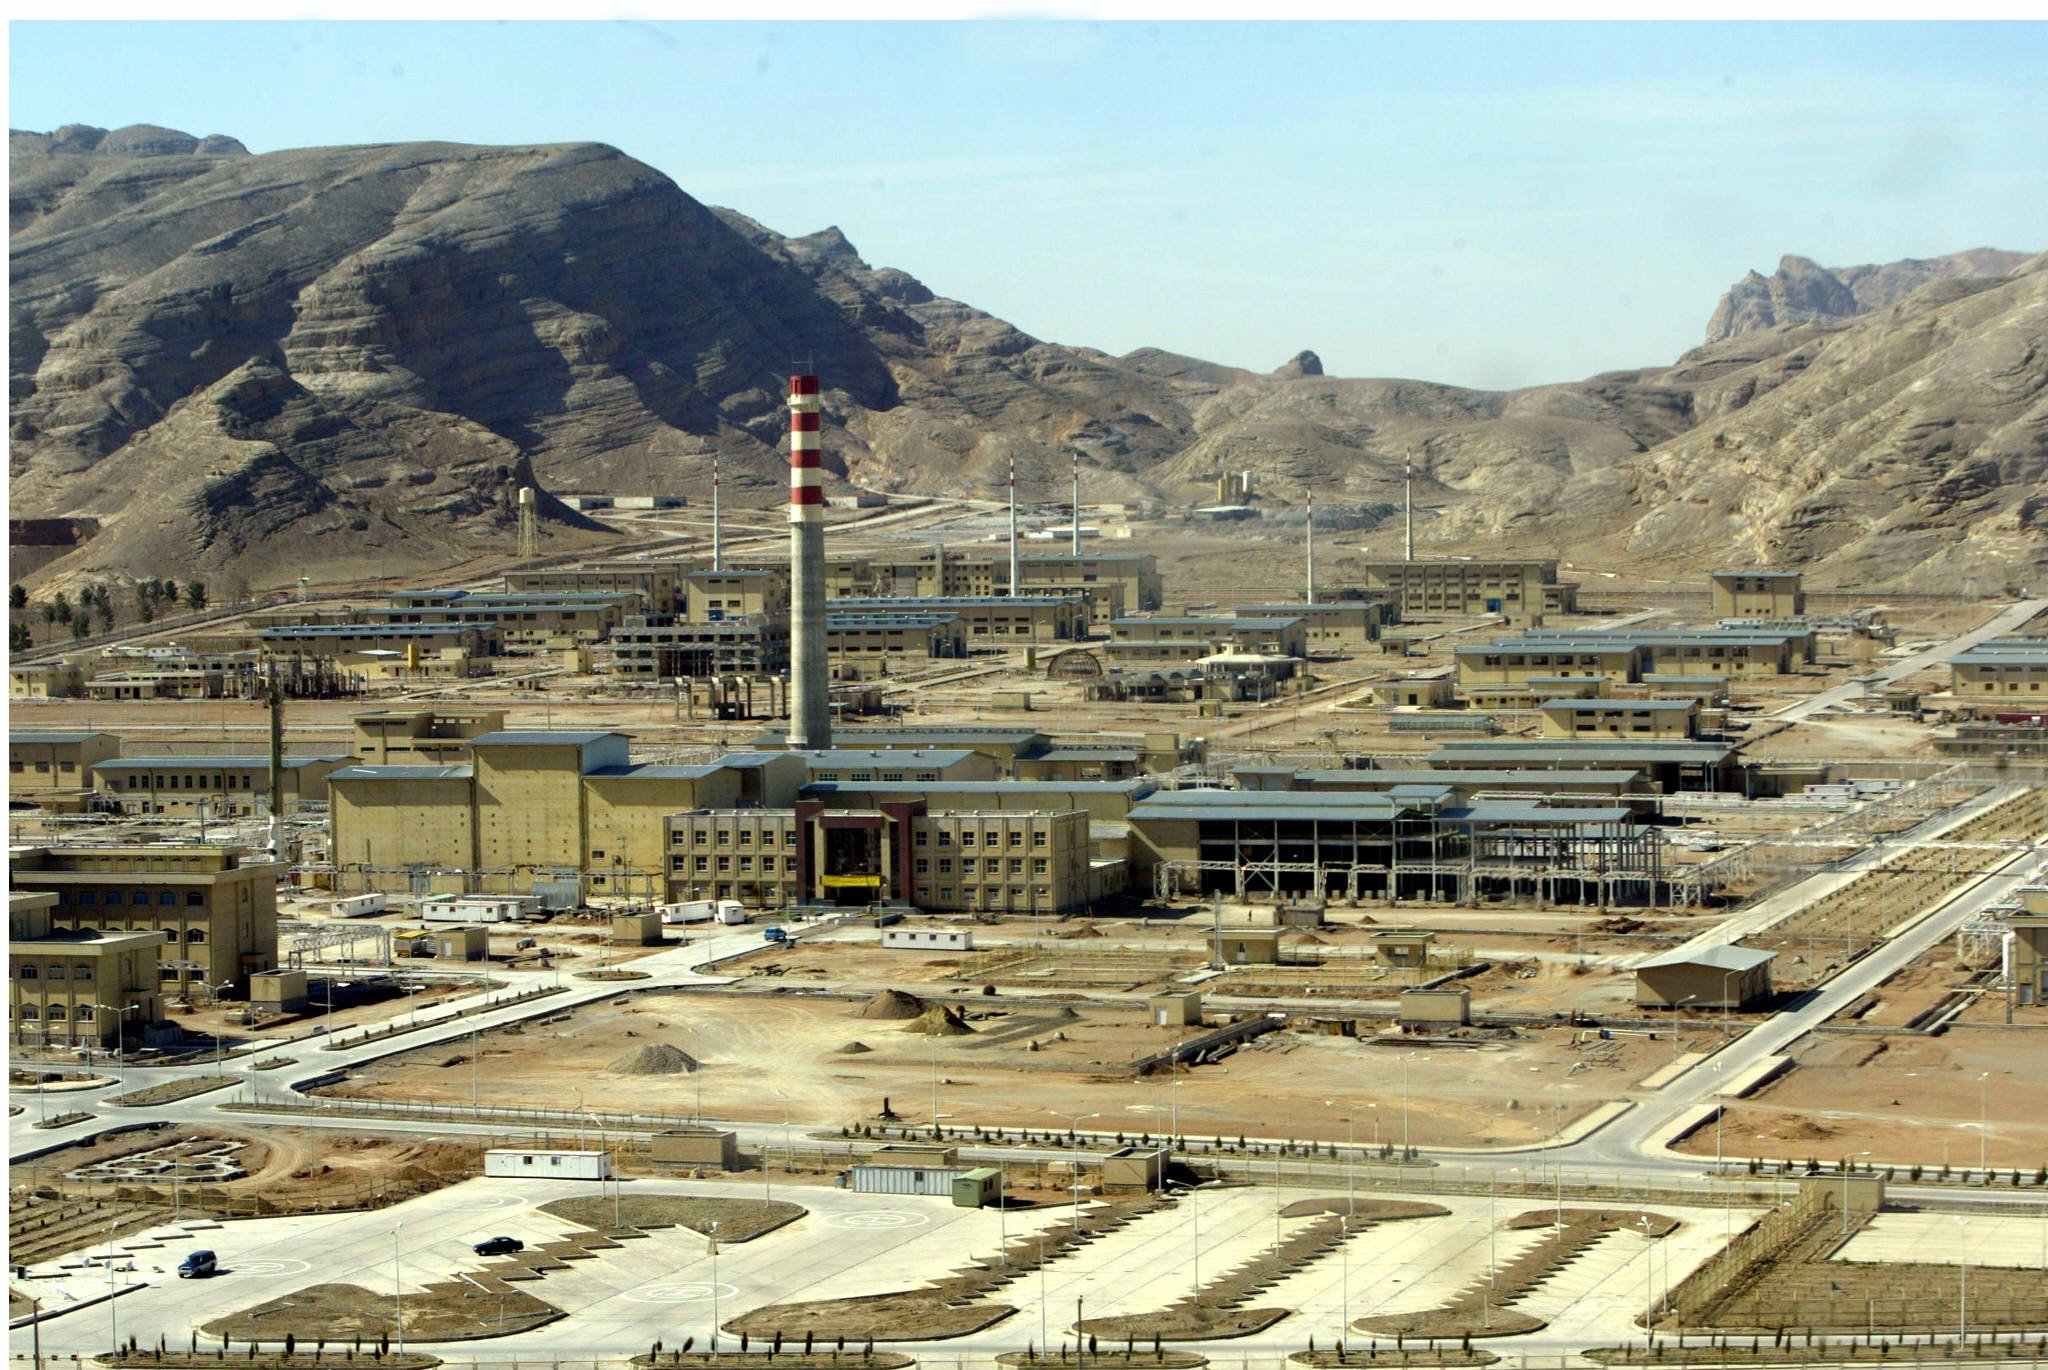 Iran has a spate of dangerous nuclear sites - including power plants, uranium mines and research reactors, pictured: Isfahan power plant